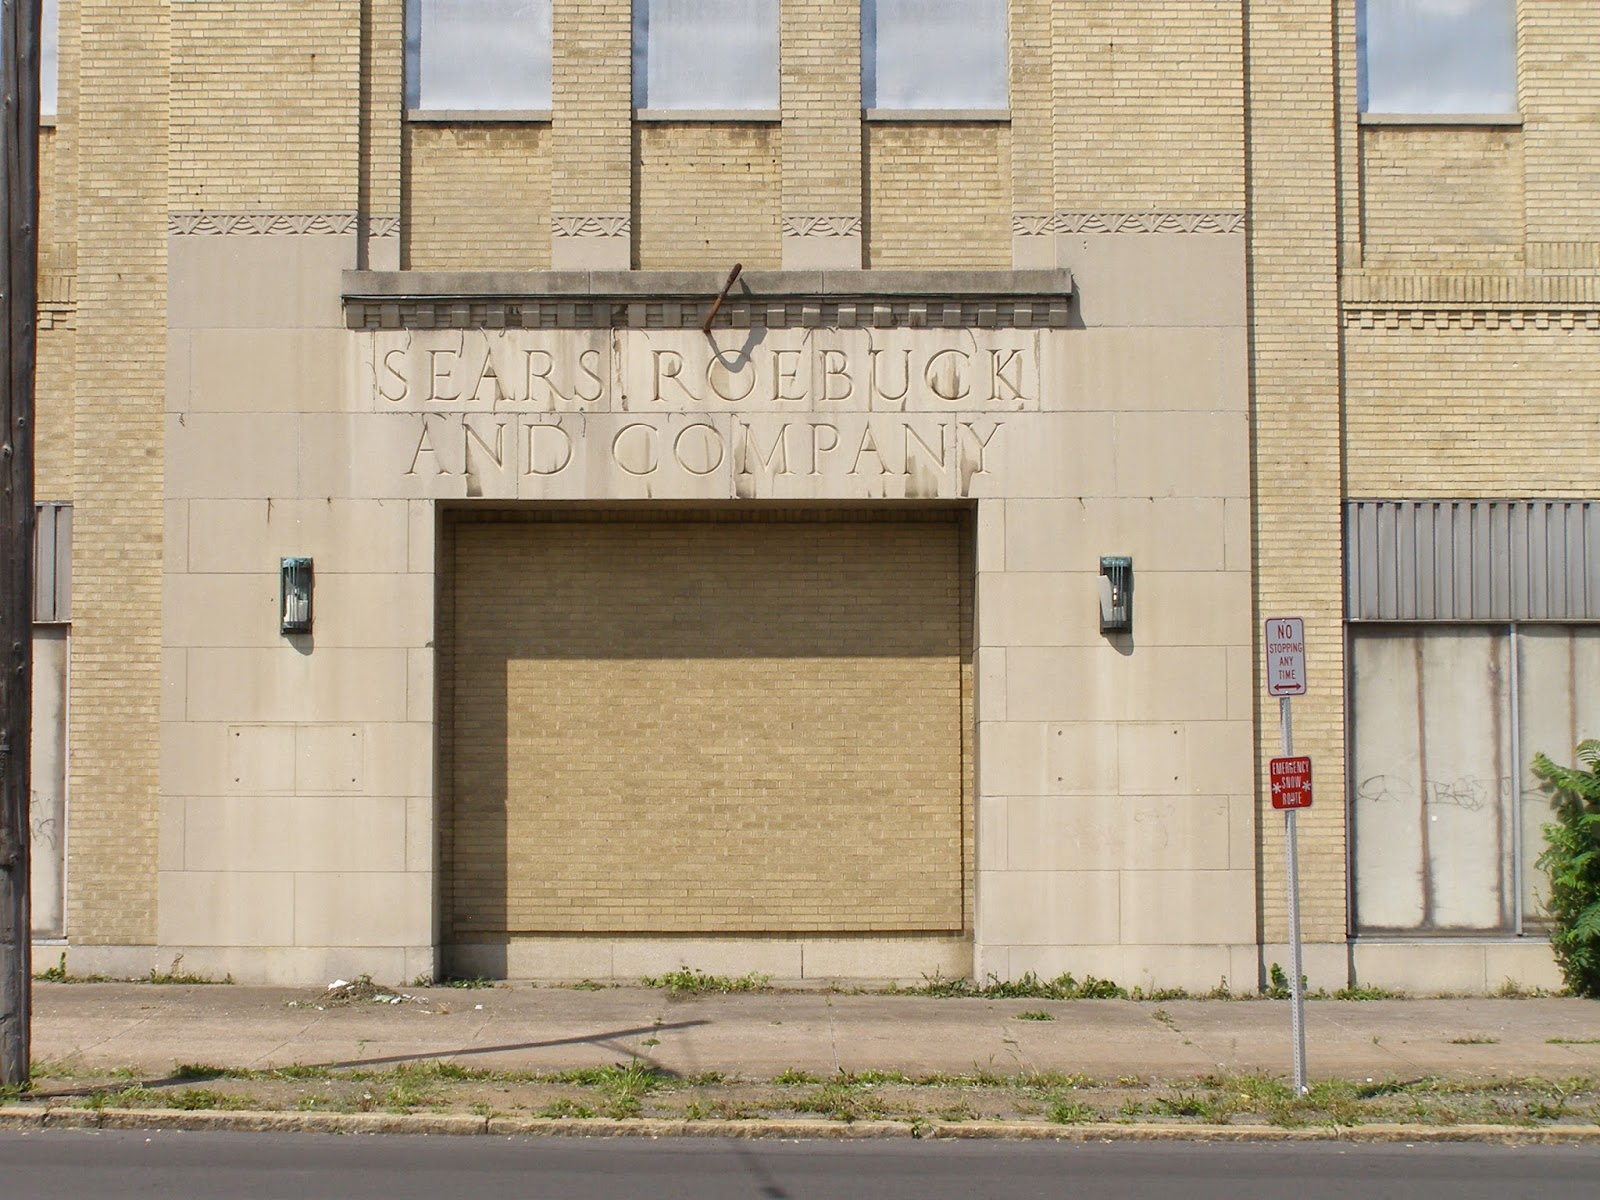 My Central New York: Deco Delights: Sears Building Awaits a Better Future - or Demolition